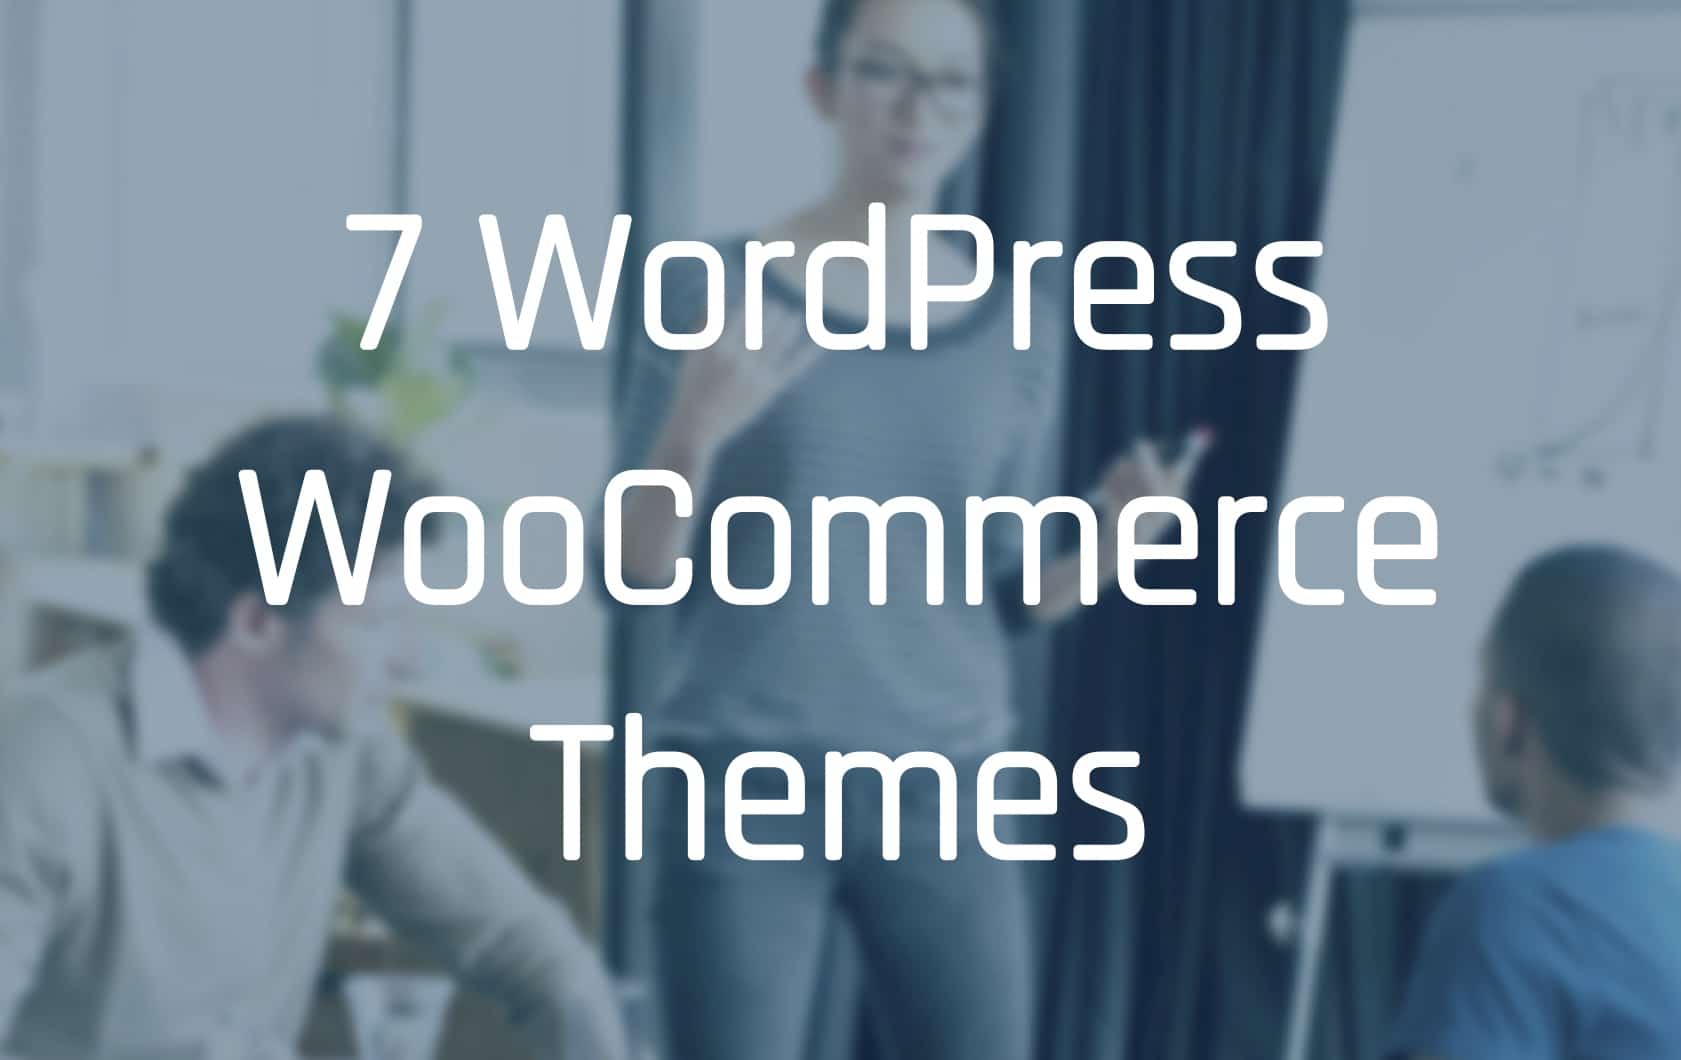 A person is seen smiling in a screenshot of seven WordPress WooCommerce themes.